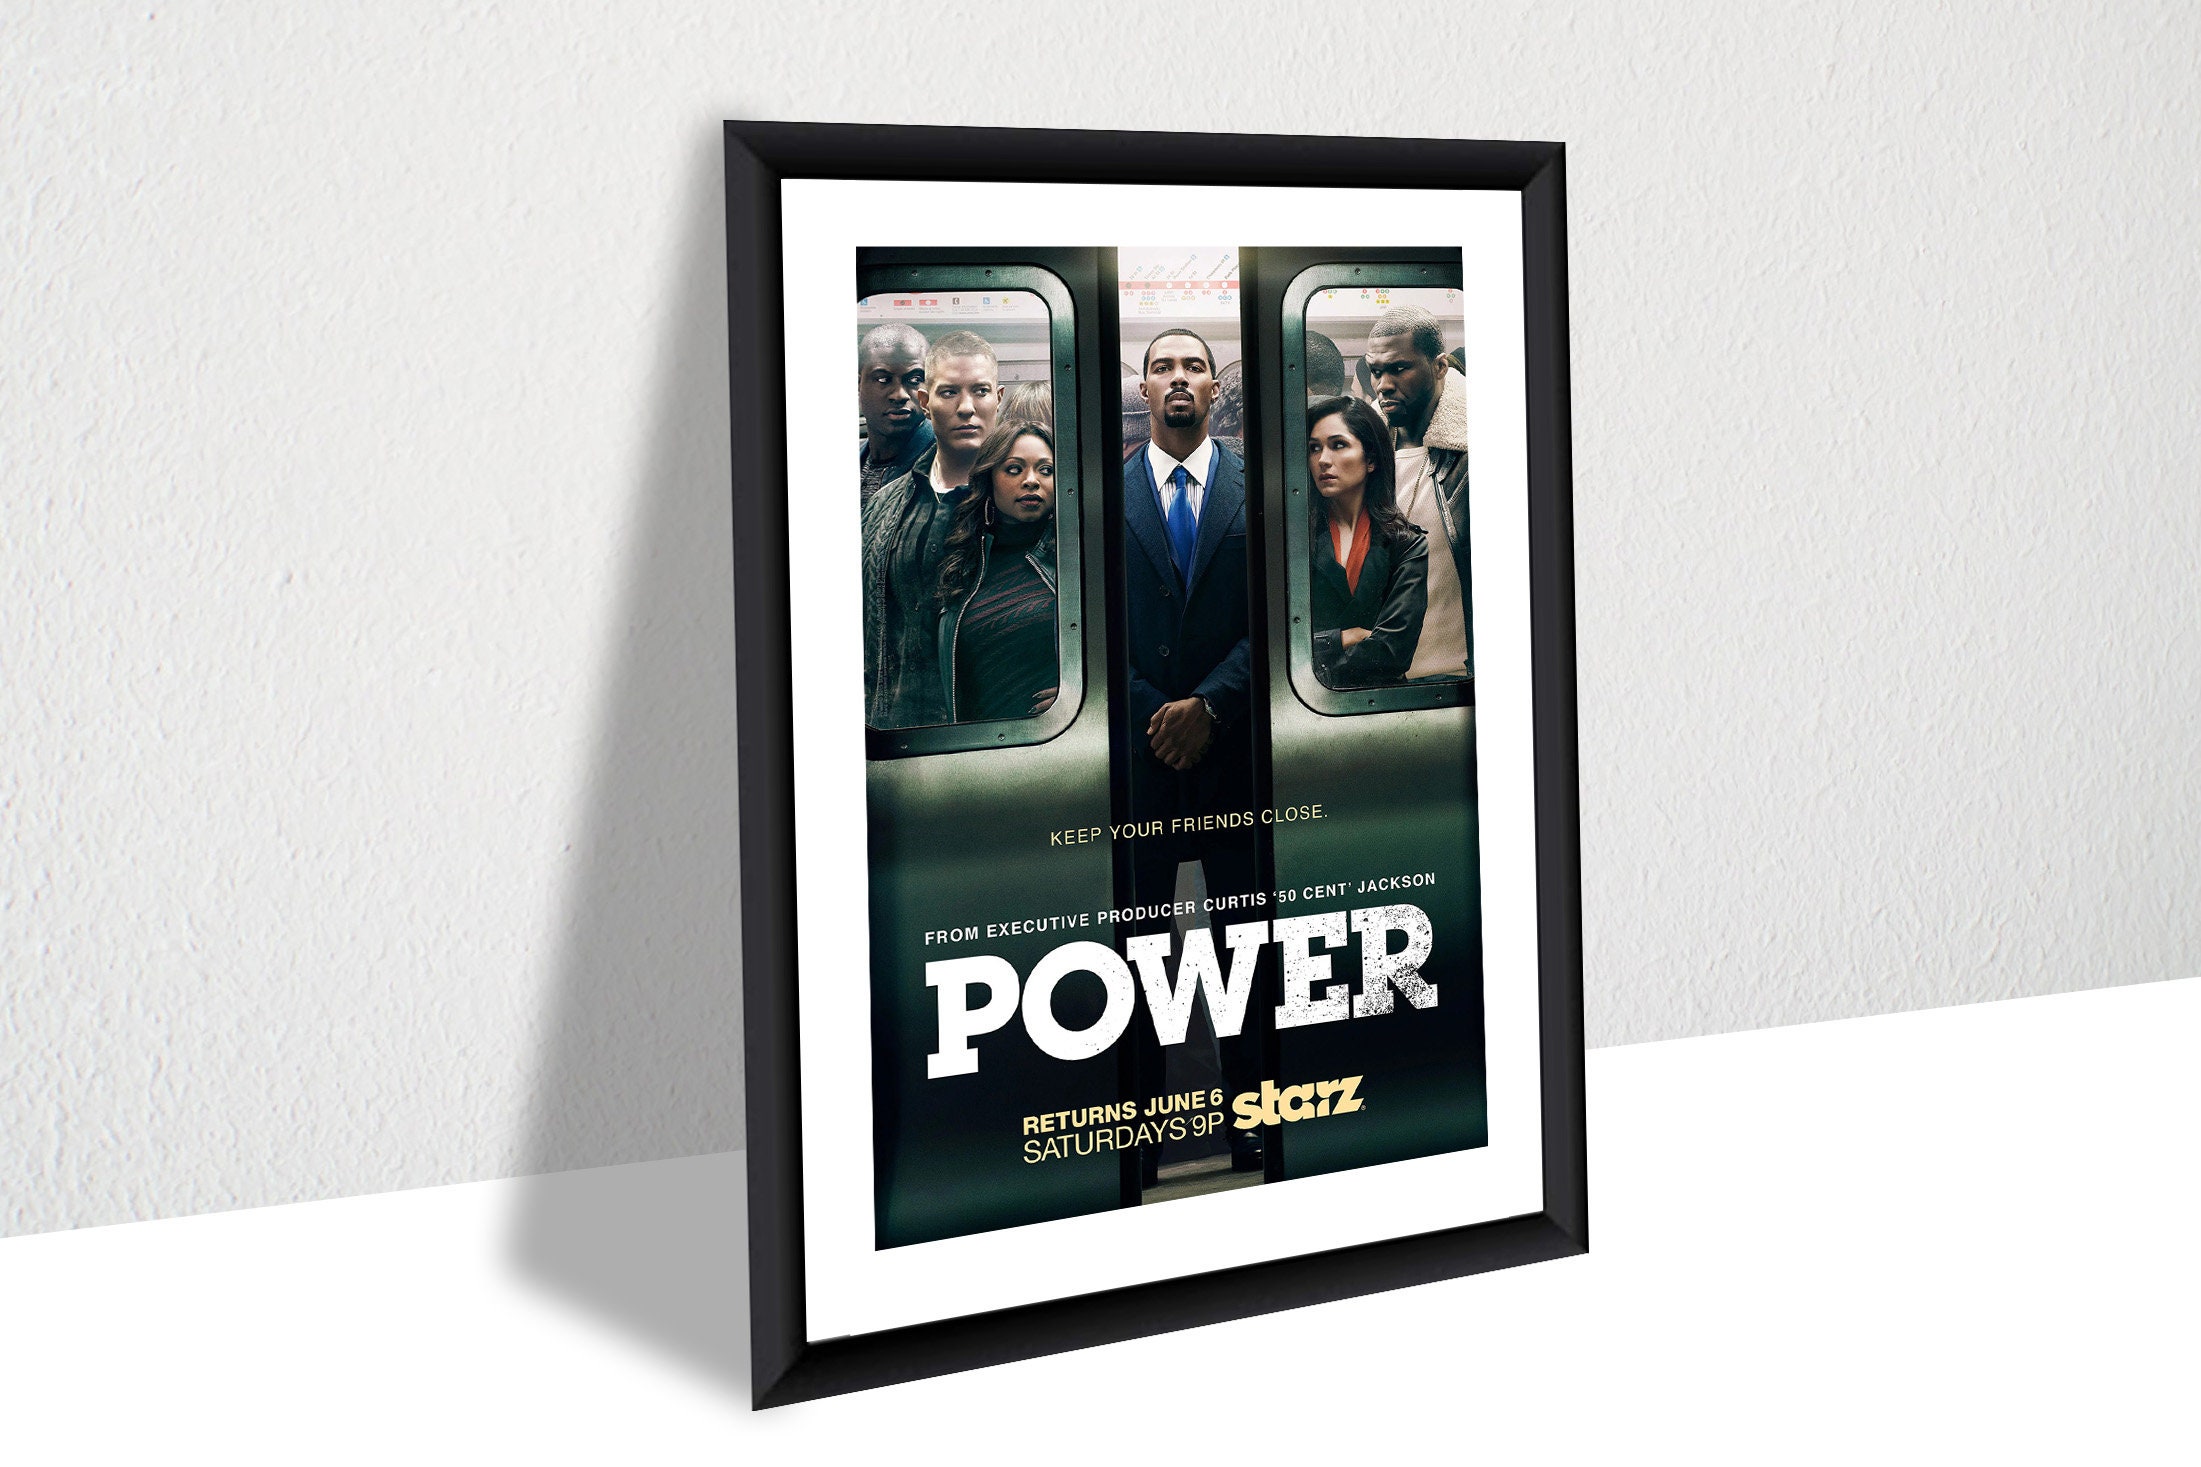 Power TV Series Poster Canvas Print, Wall Art, Wall Decor, Canvas Print, Room Decor, Home Decor, Movie Poster for Gift